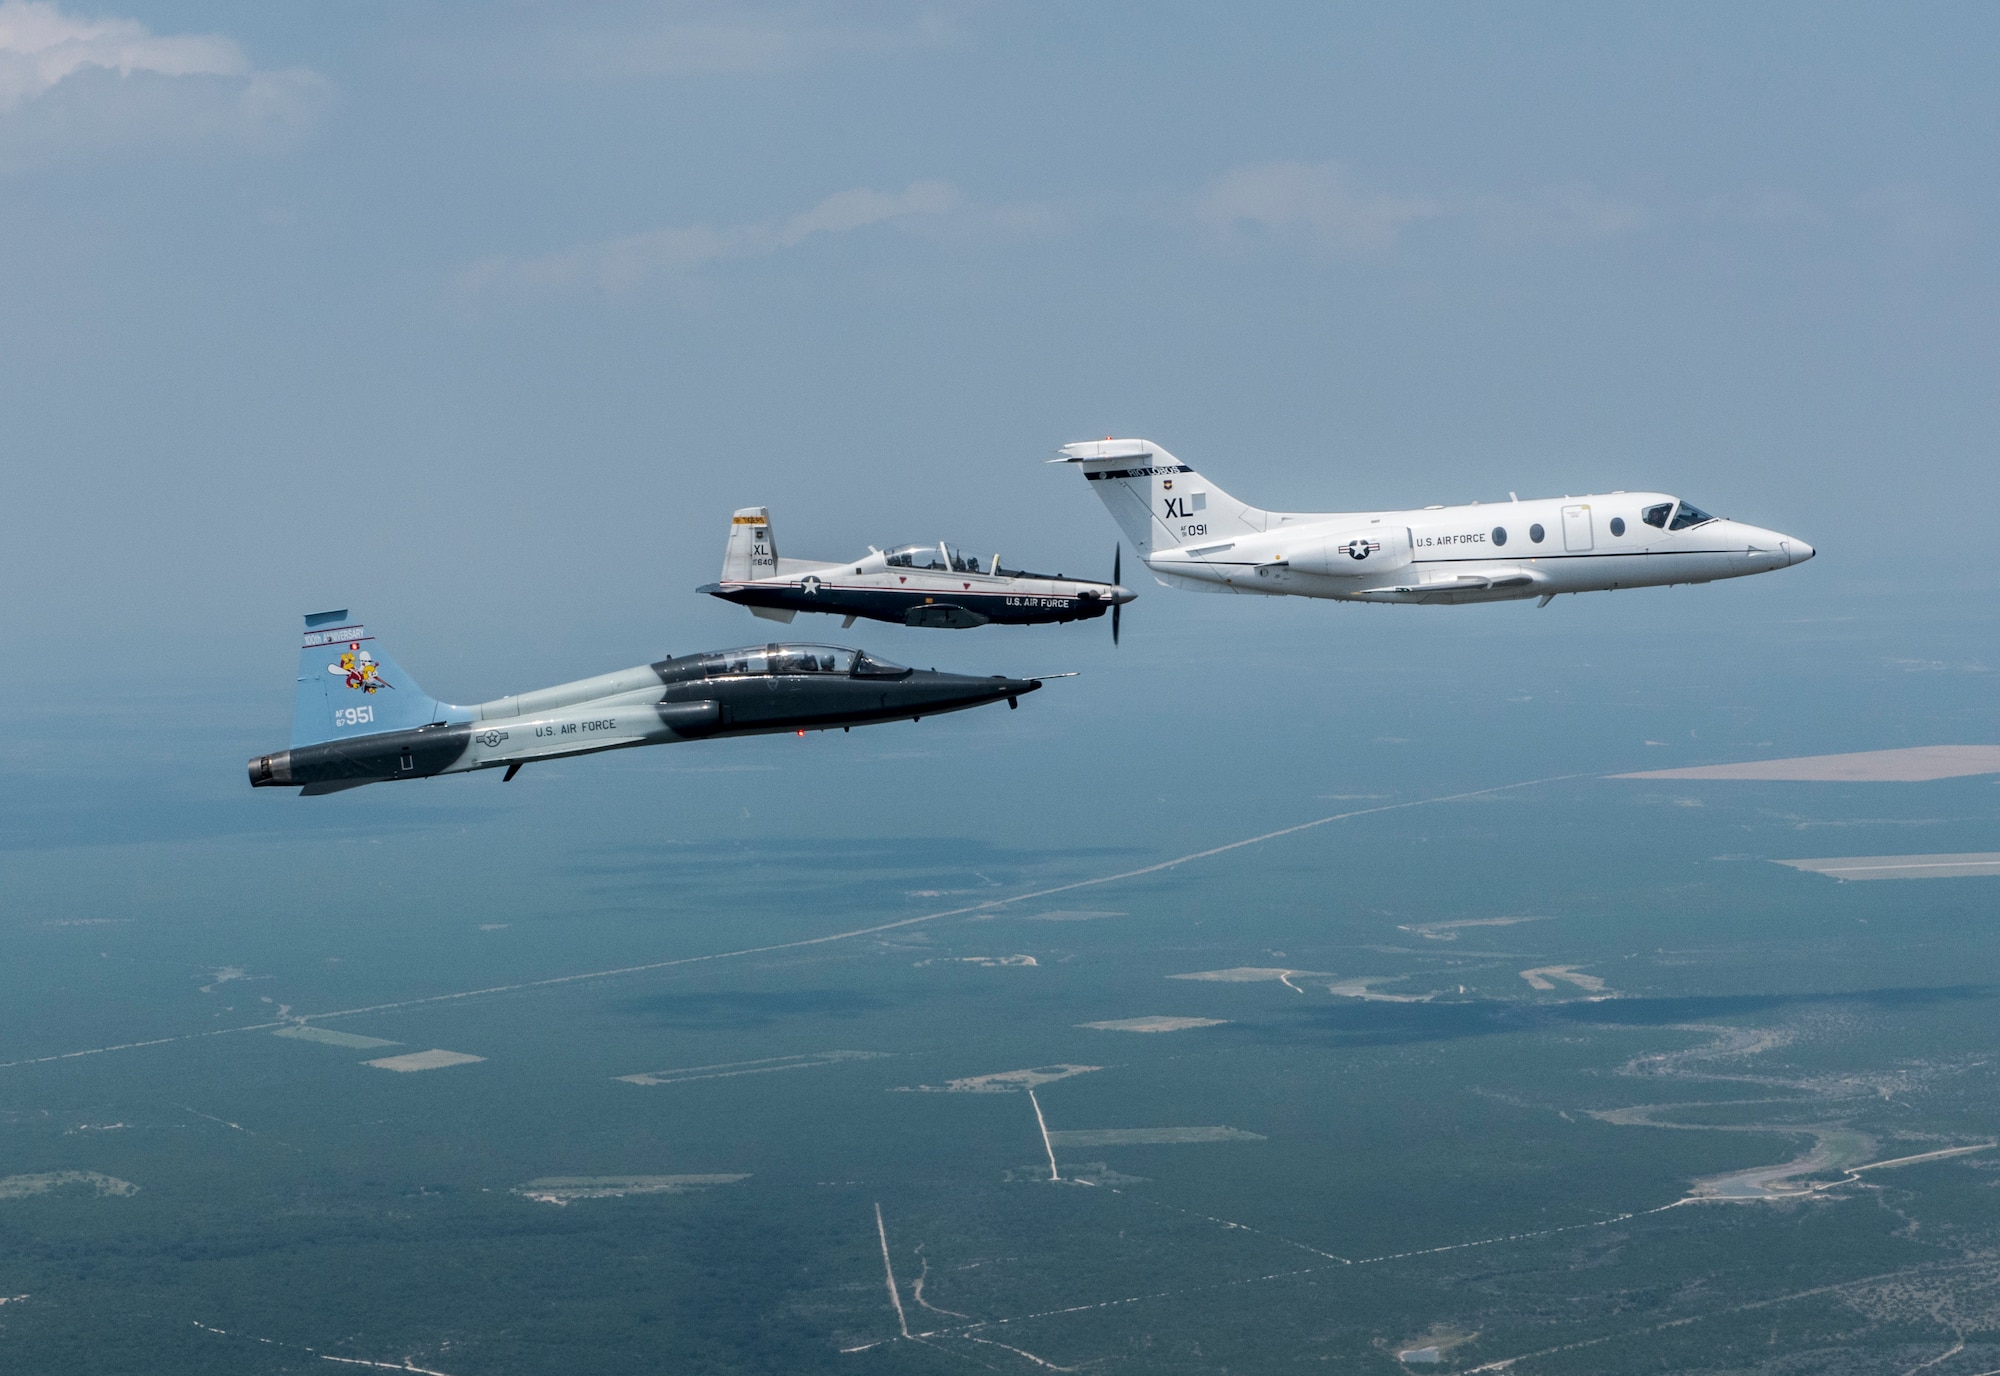 T-6 Texan II, T-1A Jayhawk and a T-38C Talon, assigned to Laughlin Air Force Base, Texas, perform a flyover in San Angelo, Texas, May 21, 2020. Laughlin performed flyovers in three Texas cities as a part of the America Strong America Salutes Campaign, to show its gratitude for all front-line responders, economy sustainers and community members in the COVID-19 pandemic. (U.S. Air Force photo by Master Sgt. JT May III)